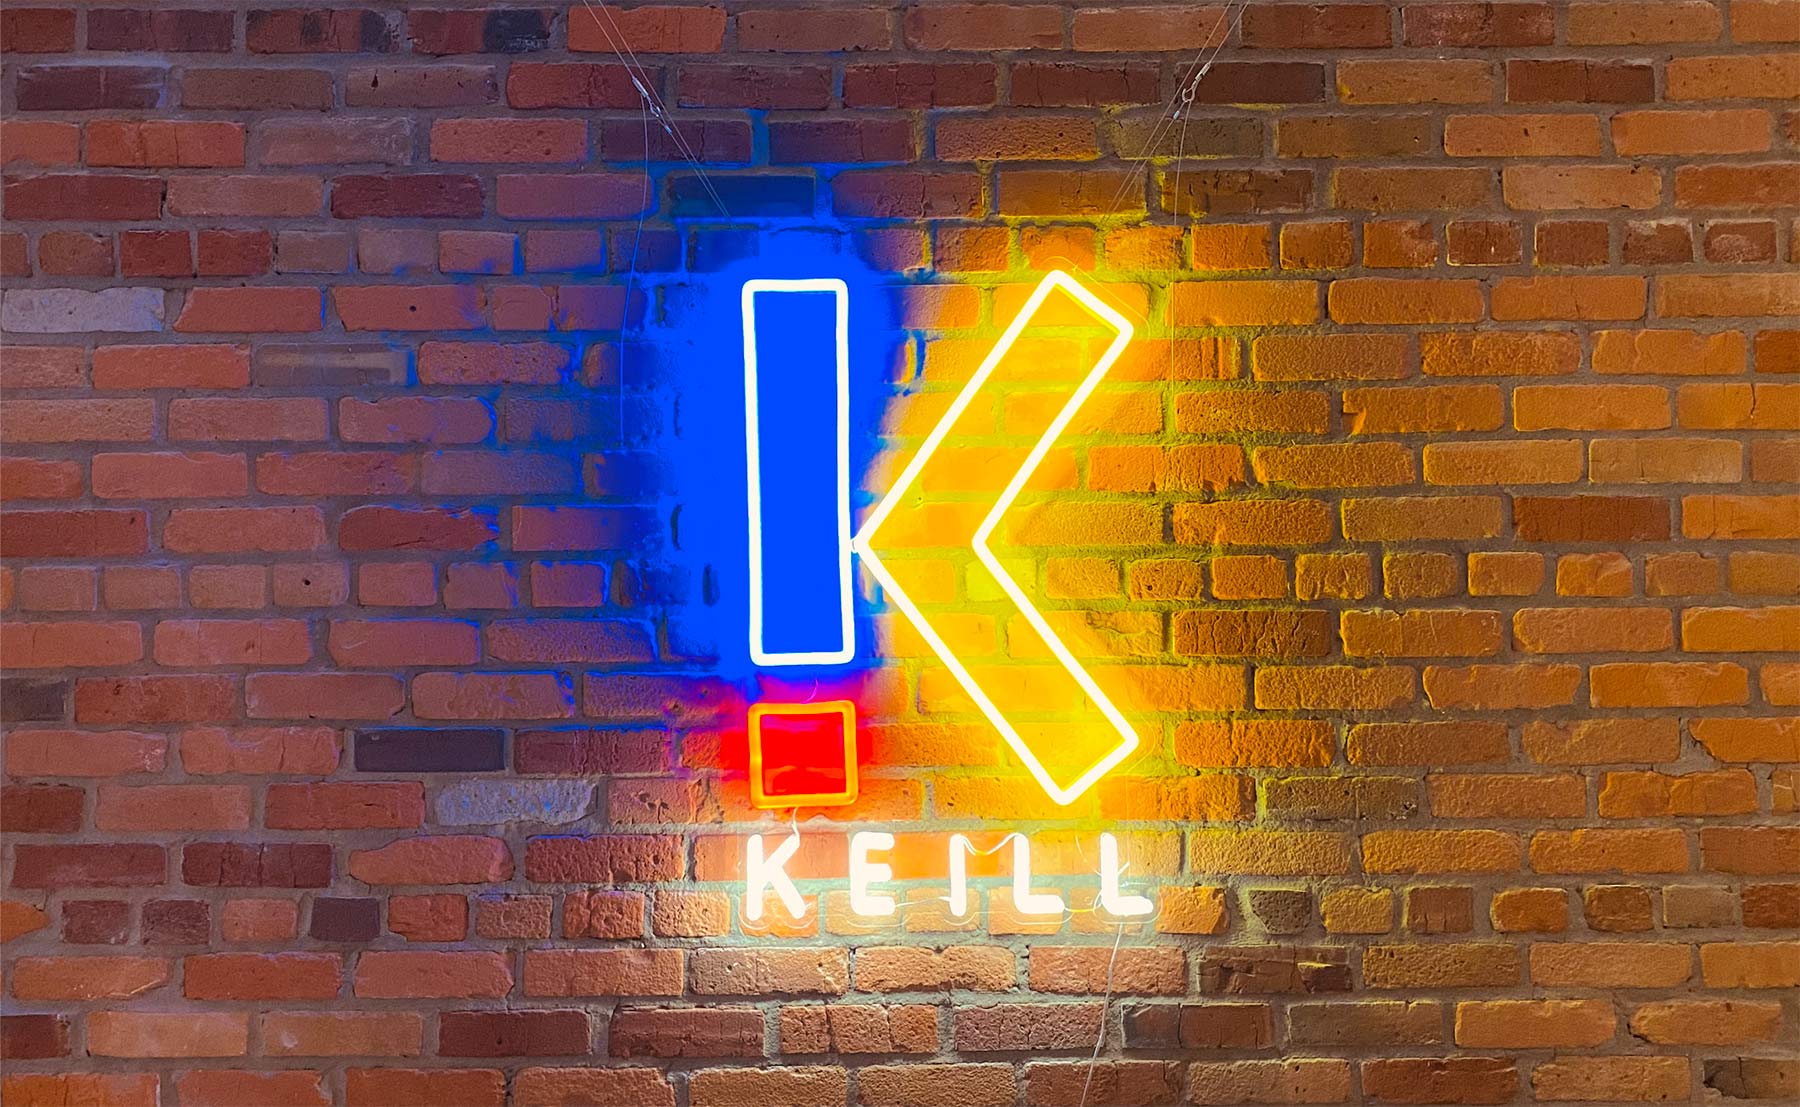 Keill & Co.neon sign